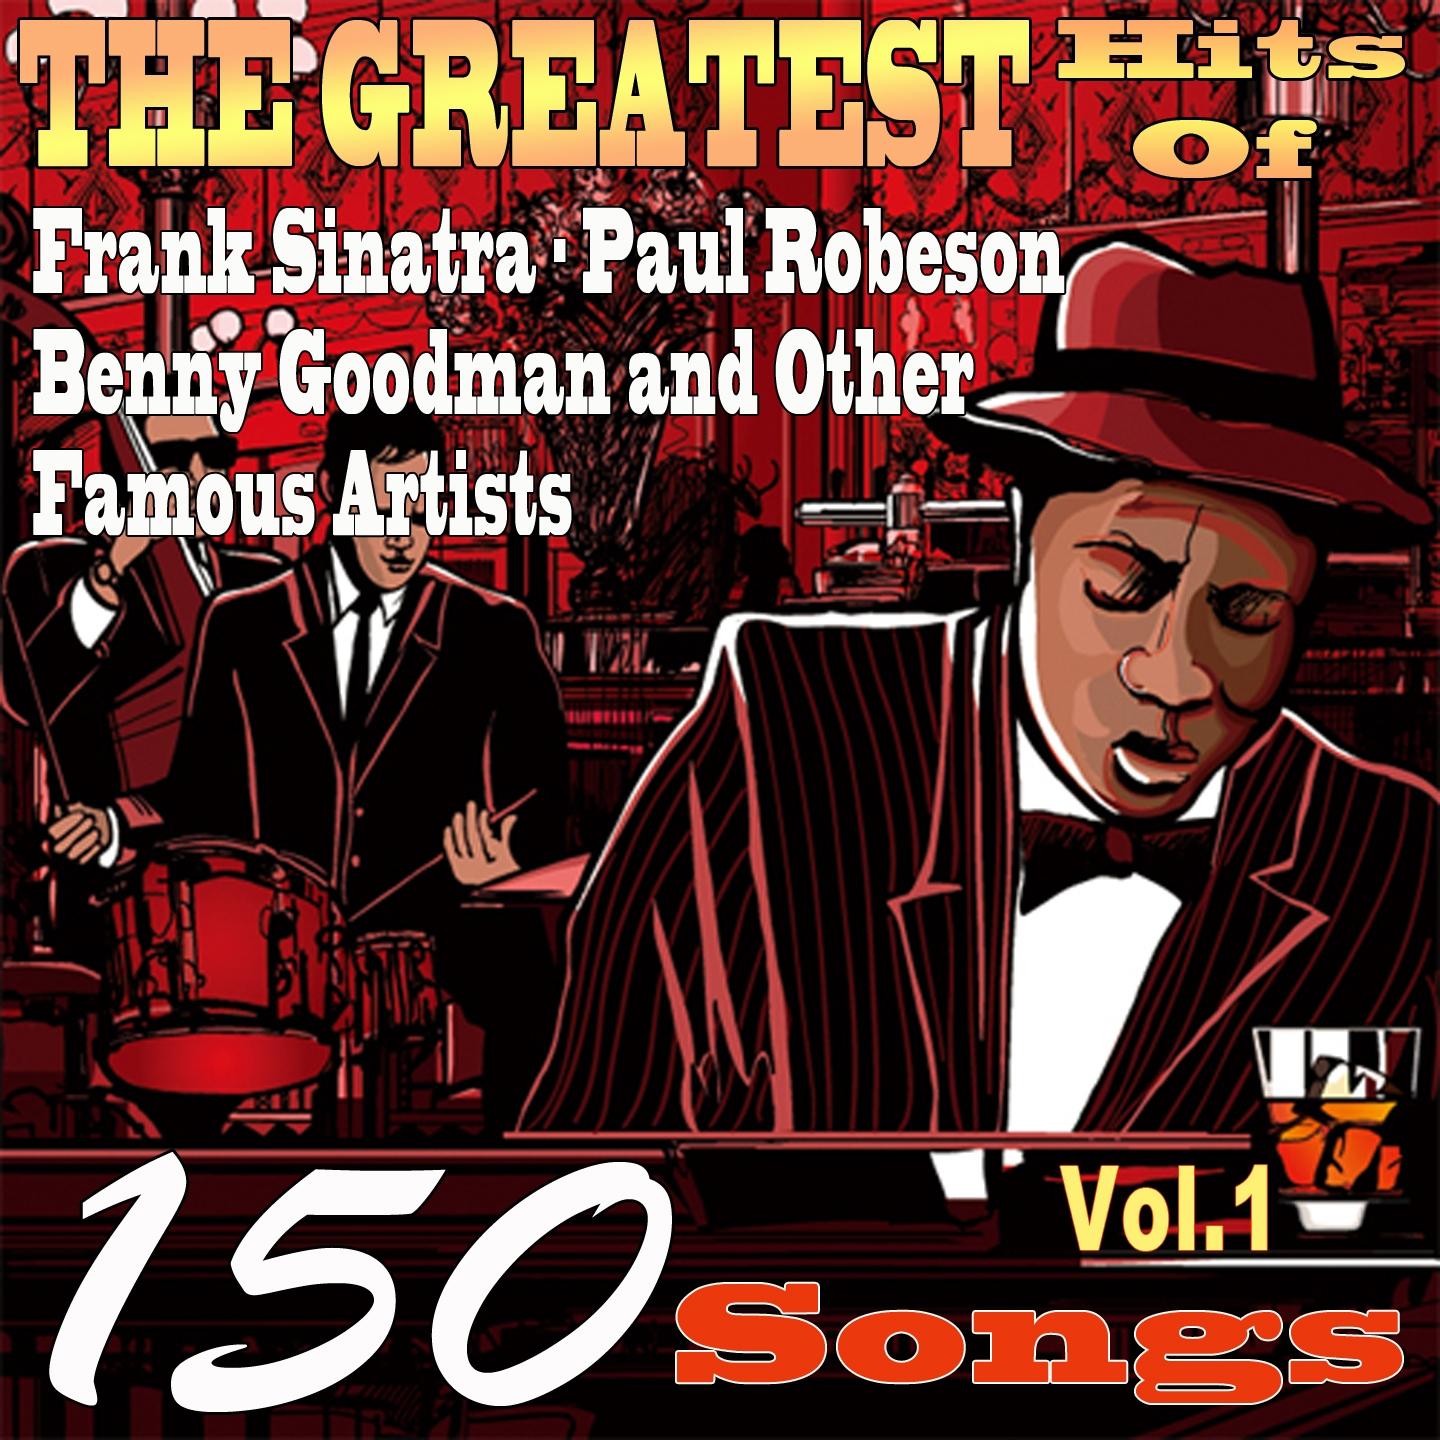 The Greatest Hits of Frank Sinatra, Paul Robeson, Benny Goodman and Other Famous Artists, Vol. 1